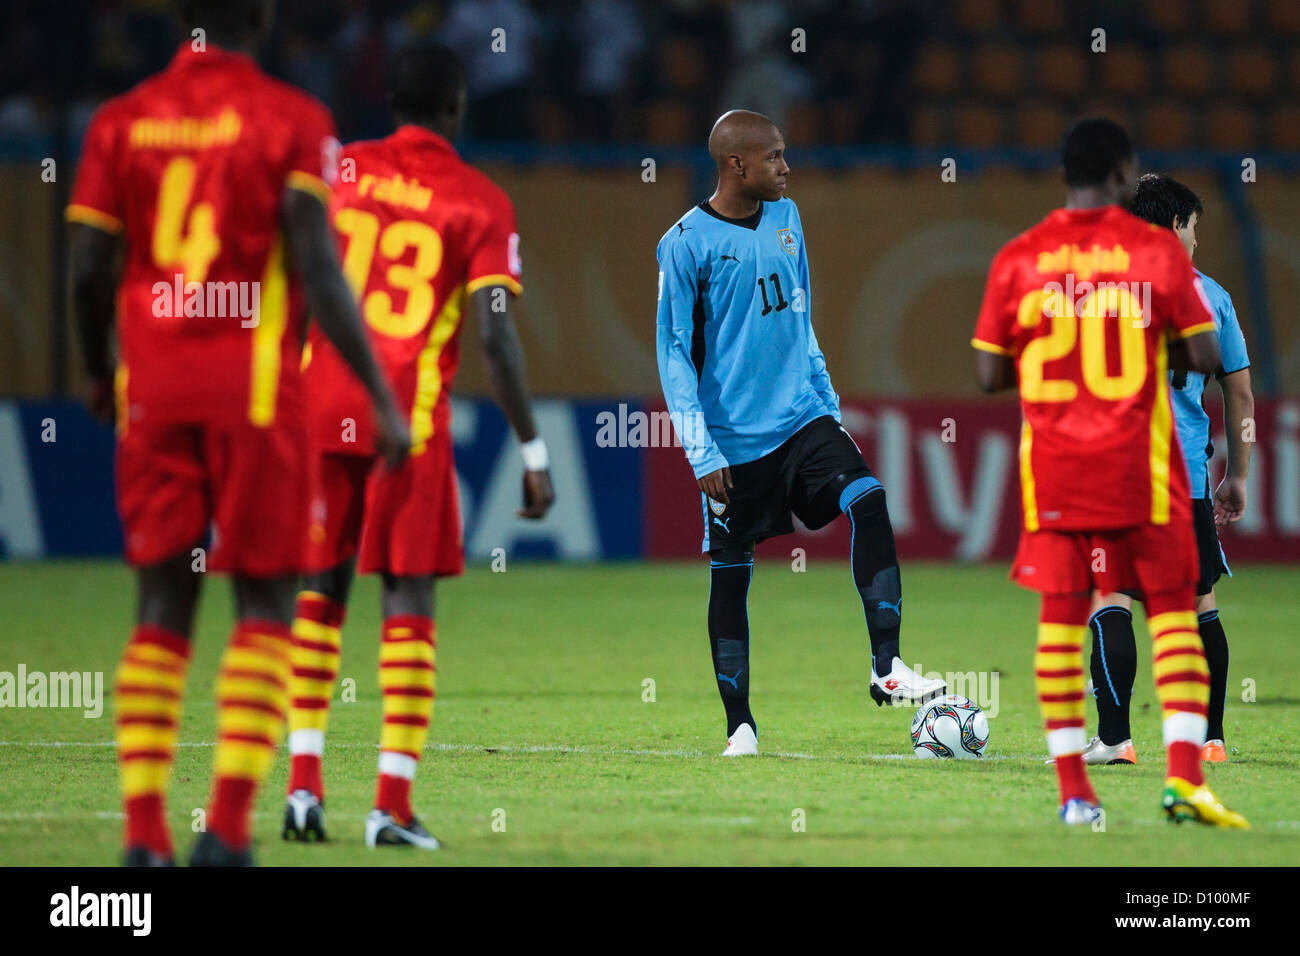 Abel Hernandez of Uruguay (11) waits to kick off the 2009 FIFA U-20 World Cup Group D match against Ghana at Ismailia Stadium. Stock Photo